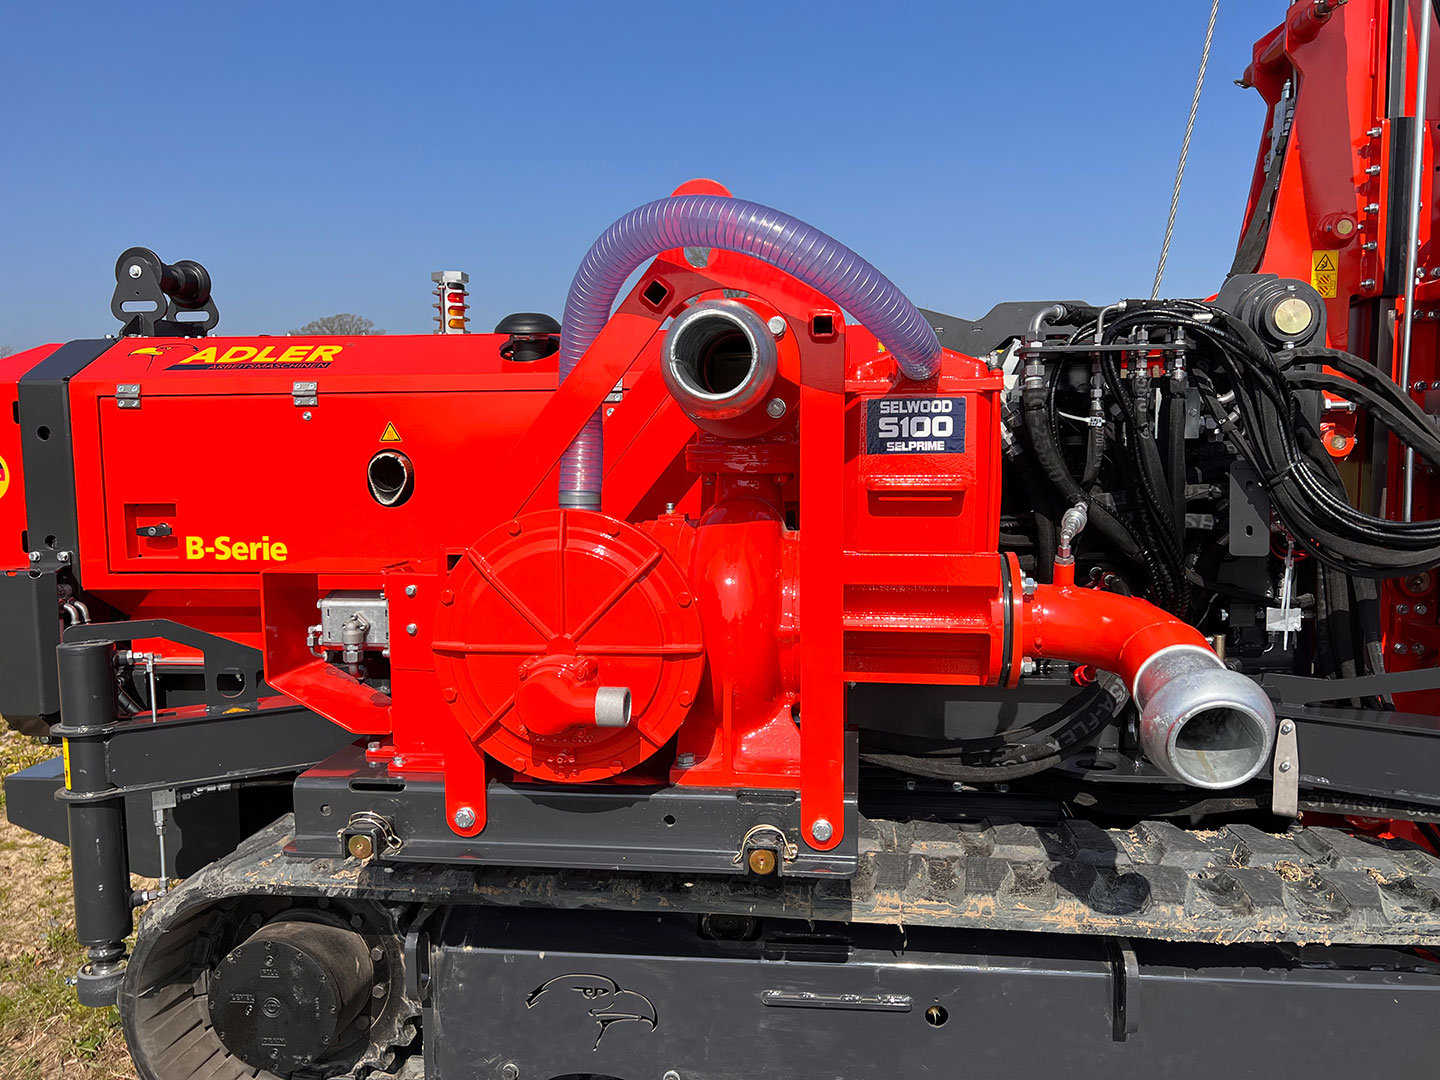 Suction pump on the ADLER drilling rig B 75 geo pro.